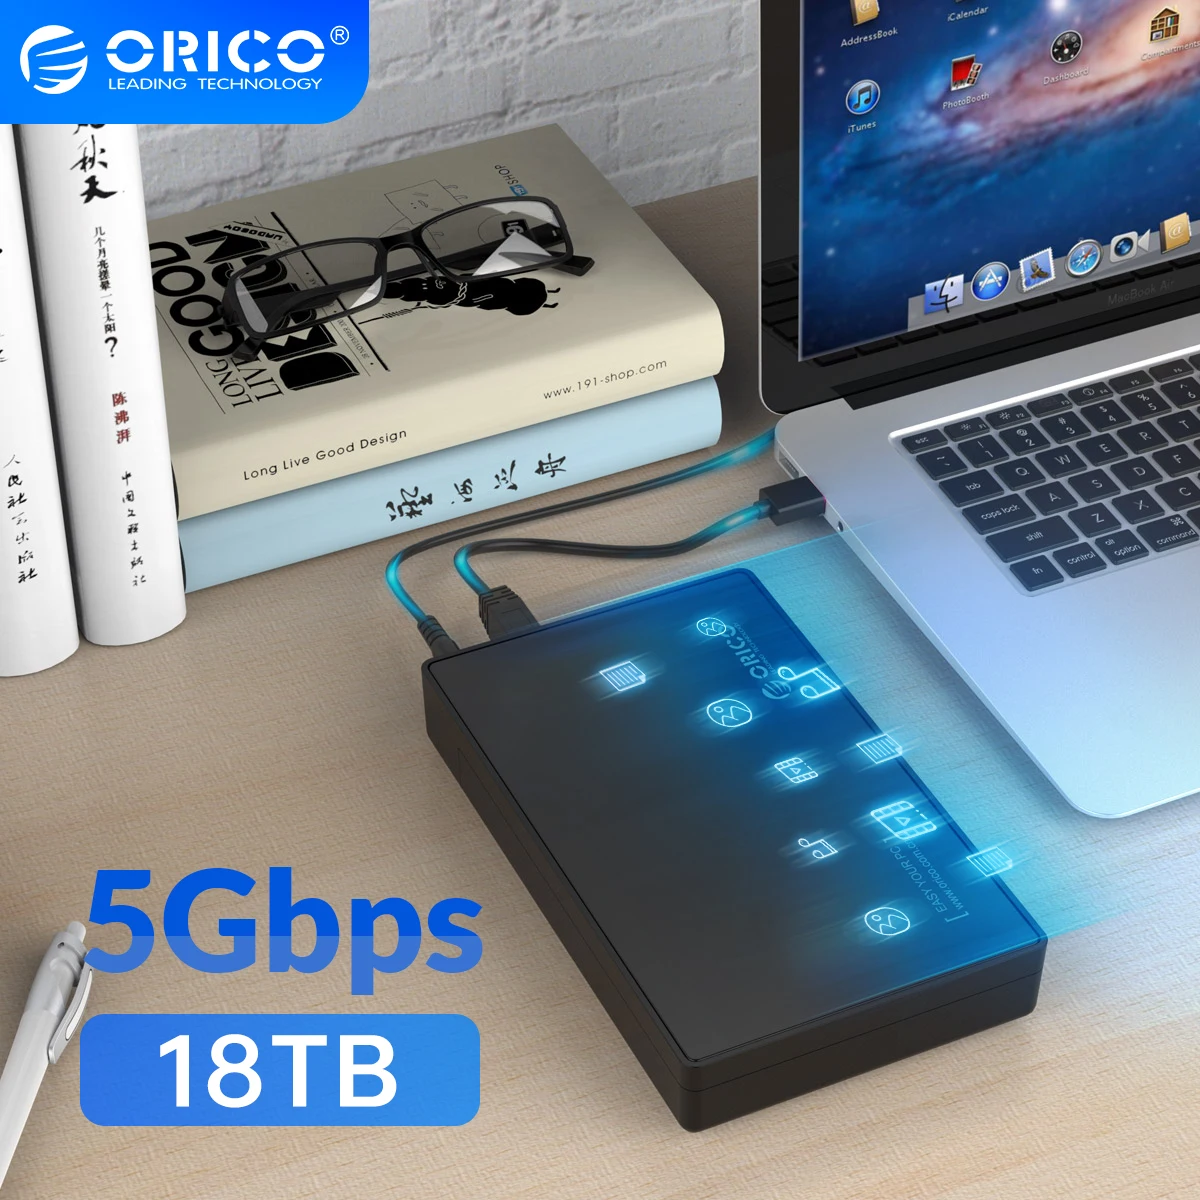 ORICO 3.5 Inch HDD Case USB 3.0 5Gbps to SATA Support UASP and 18TB Drives Designed for Notebook Desktop PC Hard Drive Enclosure